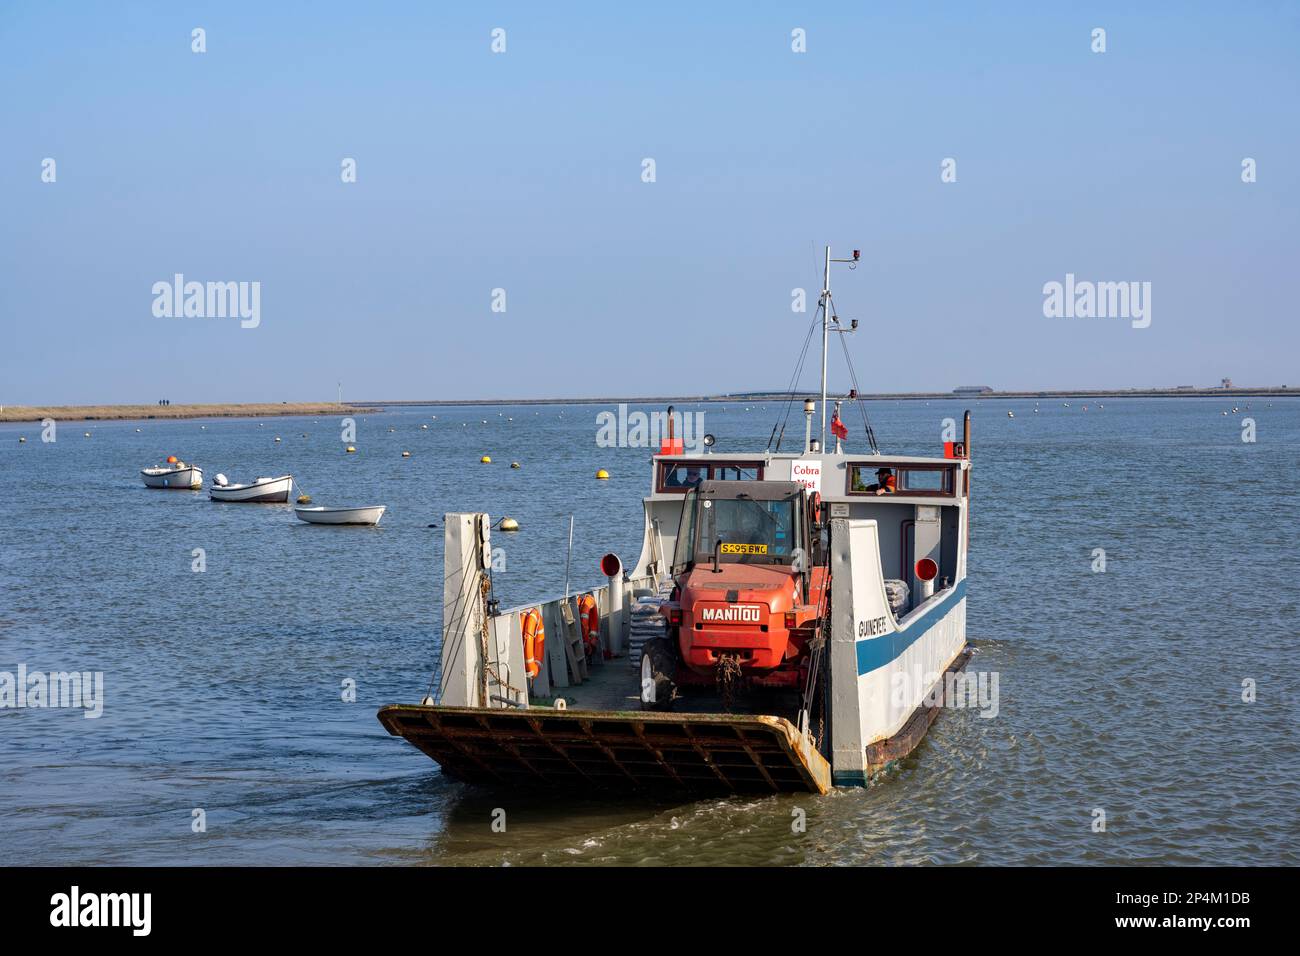 Landing craft used to transport equipment from Orford to Orfordness across the river Ore, Suffolk, UK. Stock Photo